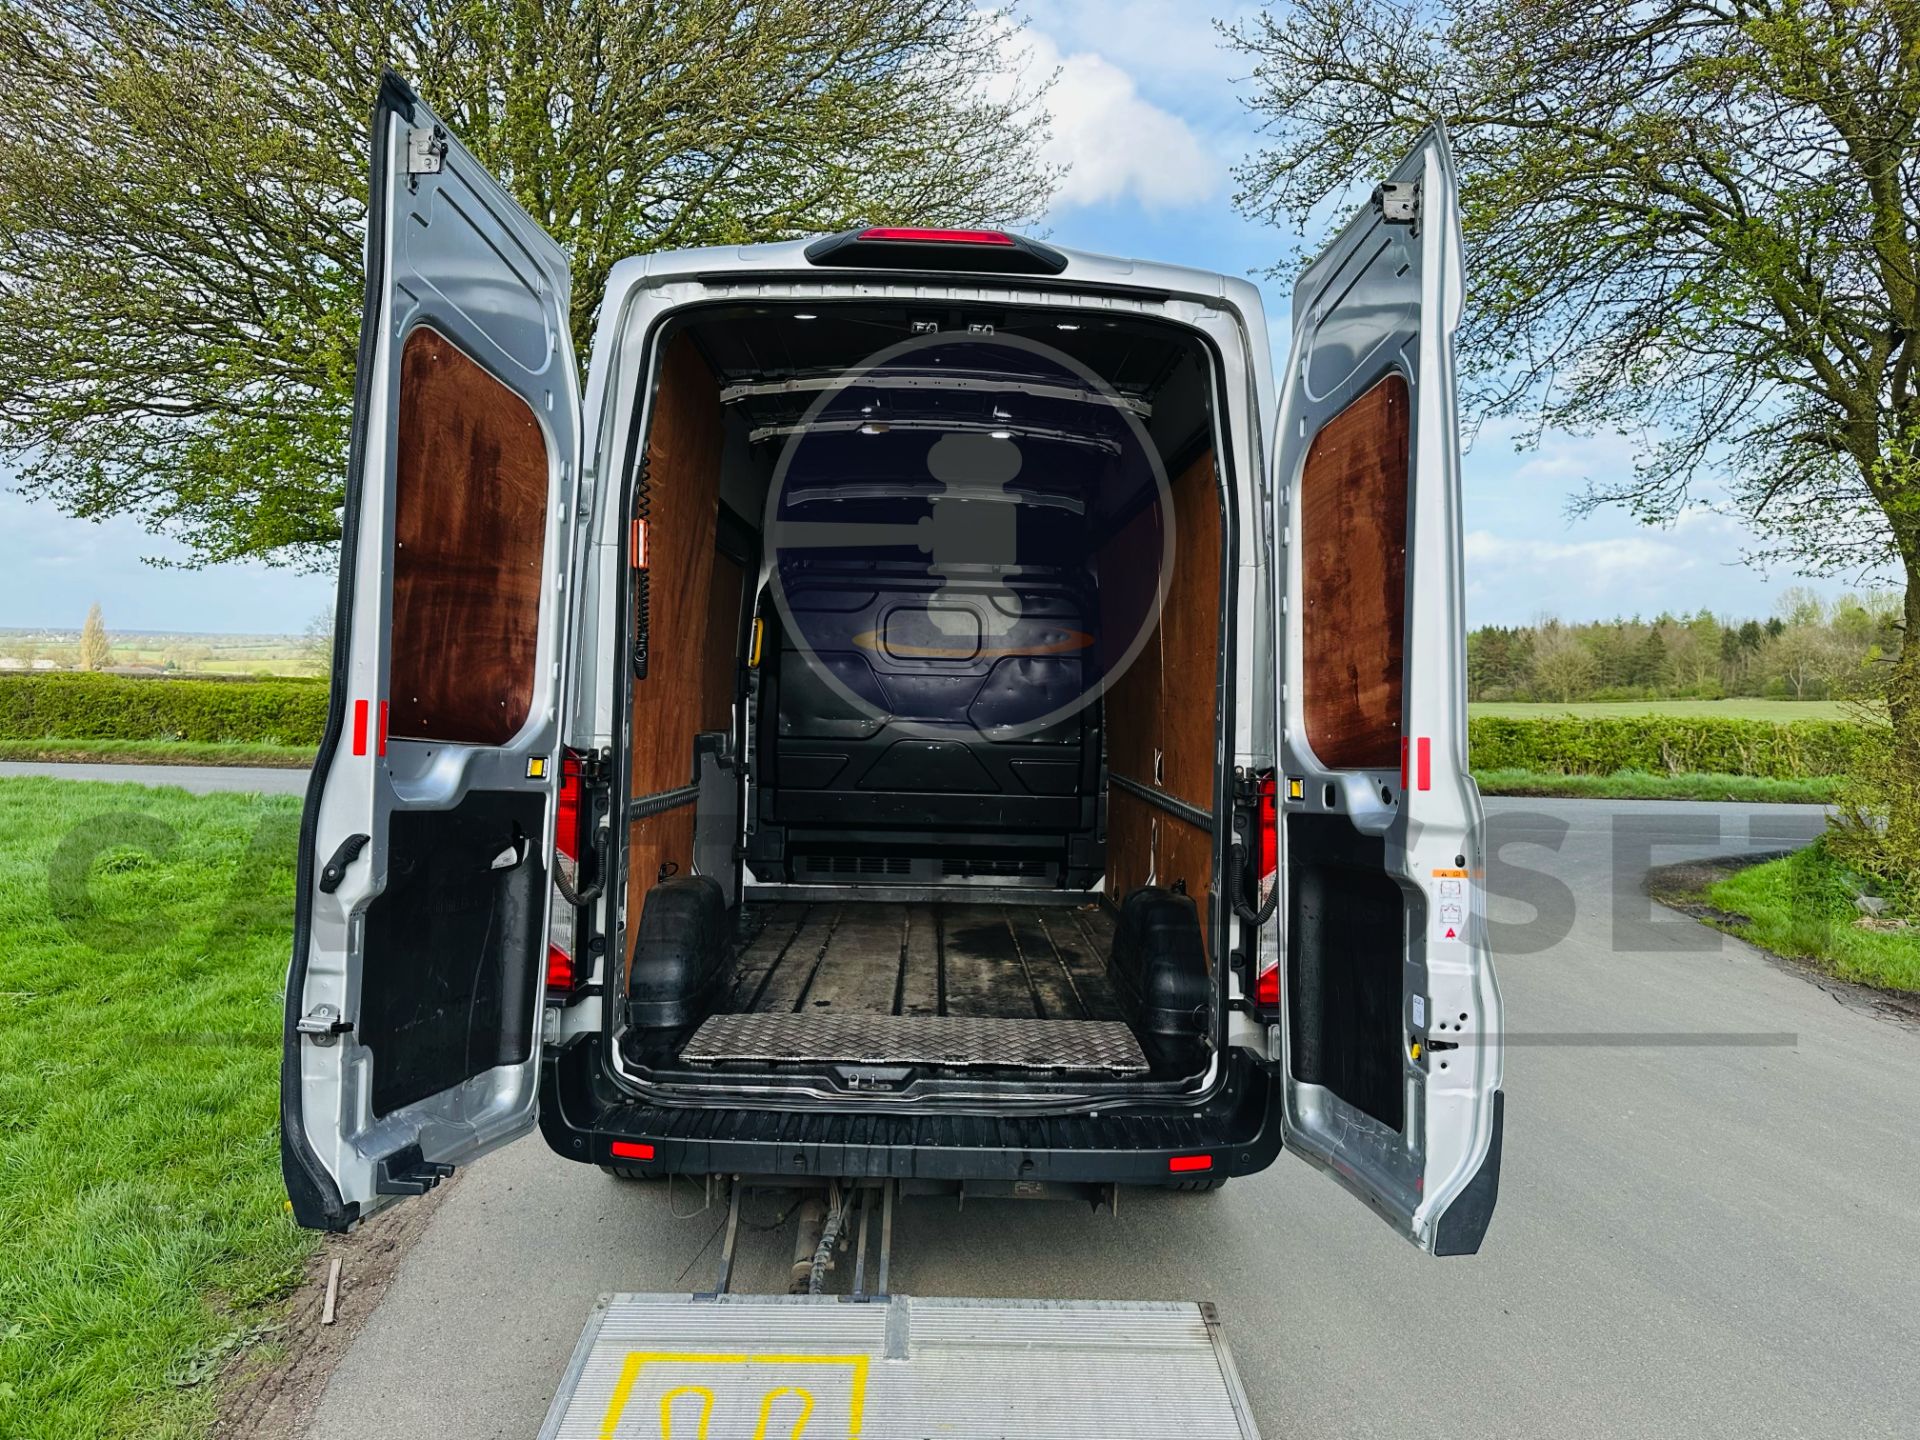 FORD TRANSIT 2.0TDCI (130) *TREND* LWB HIGH ROOF WITH ELECTRIC REAR TAIL LIFT - 20 REG - AIR CON - Image 12 of 32